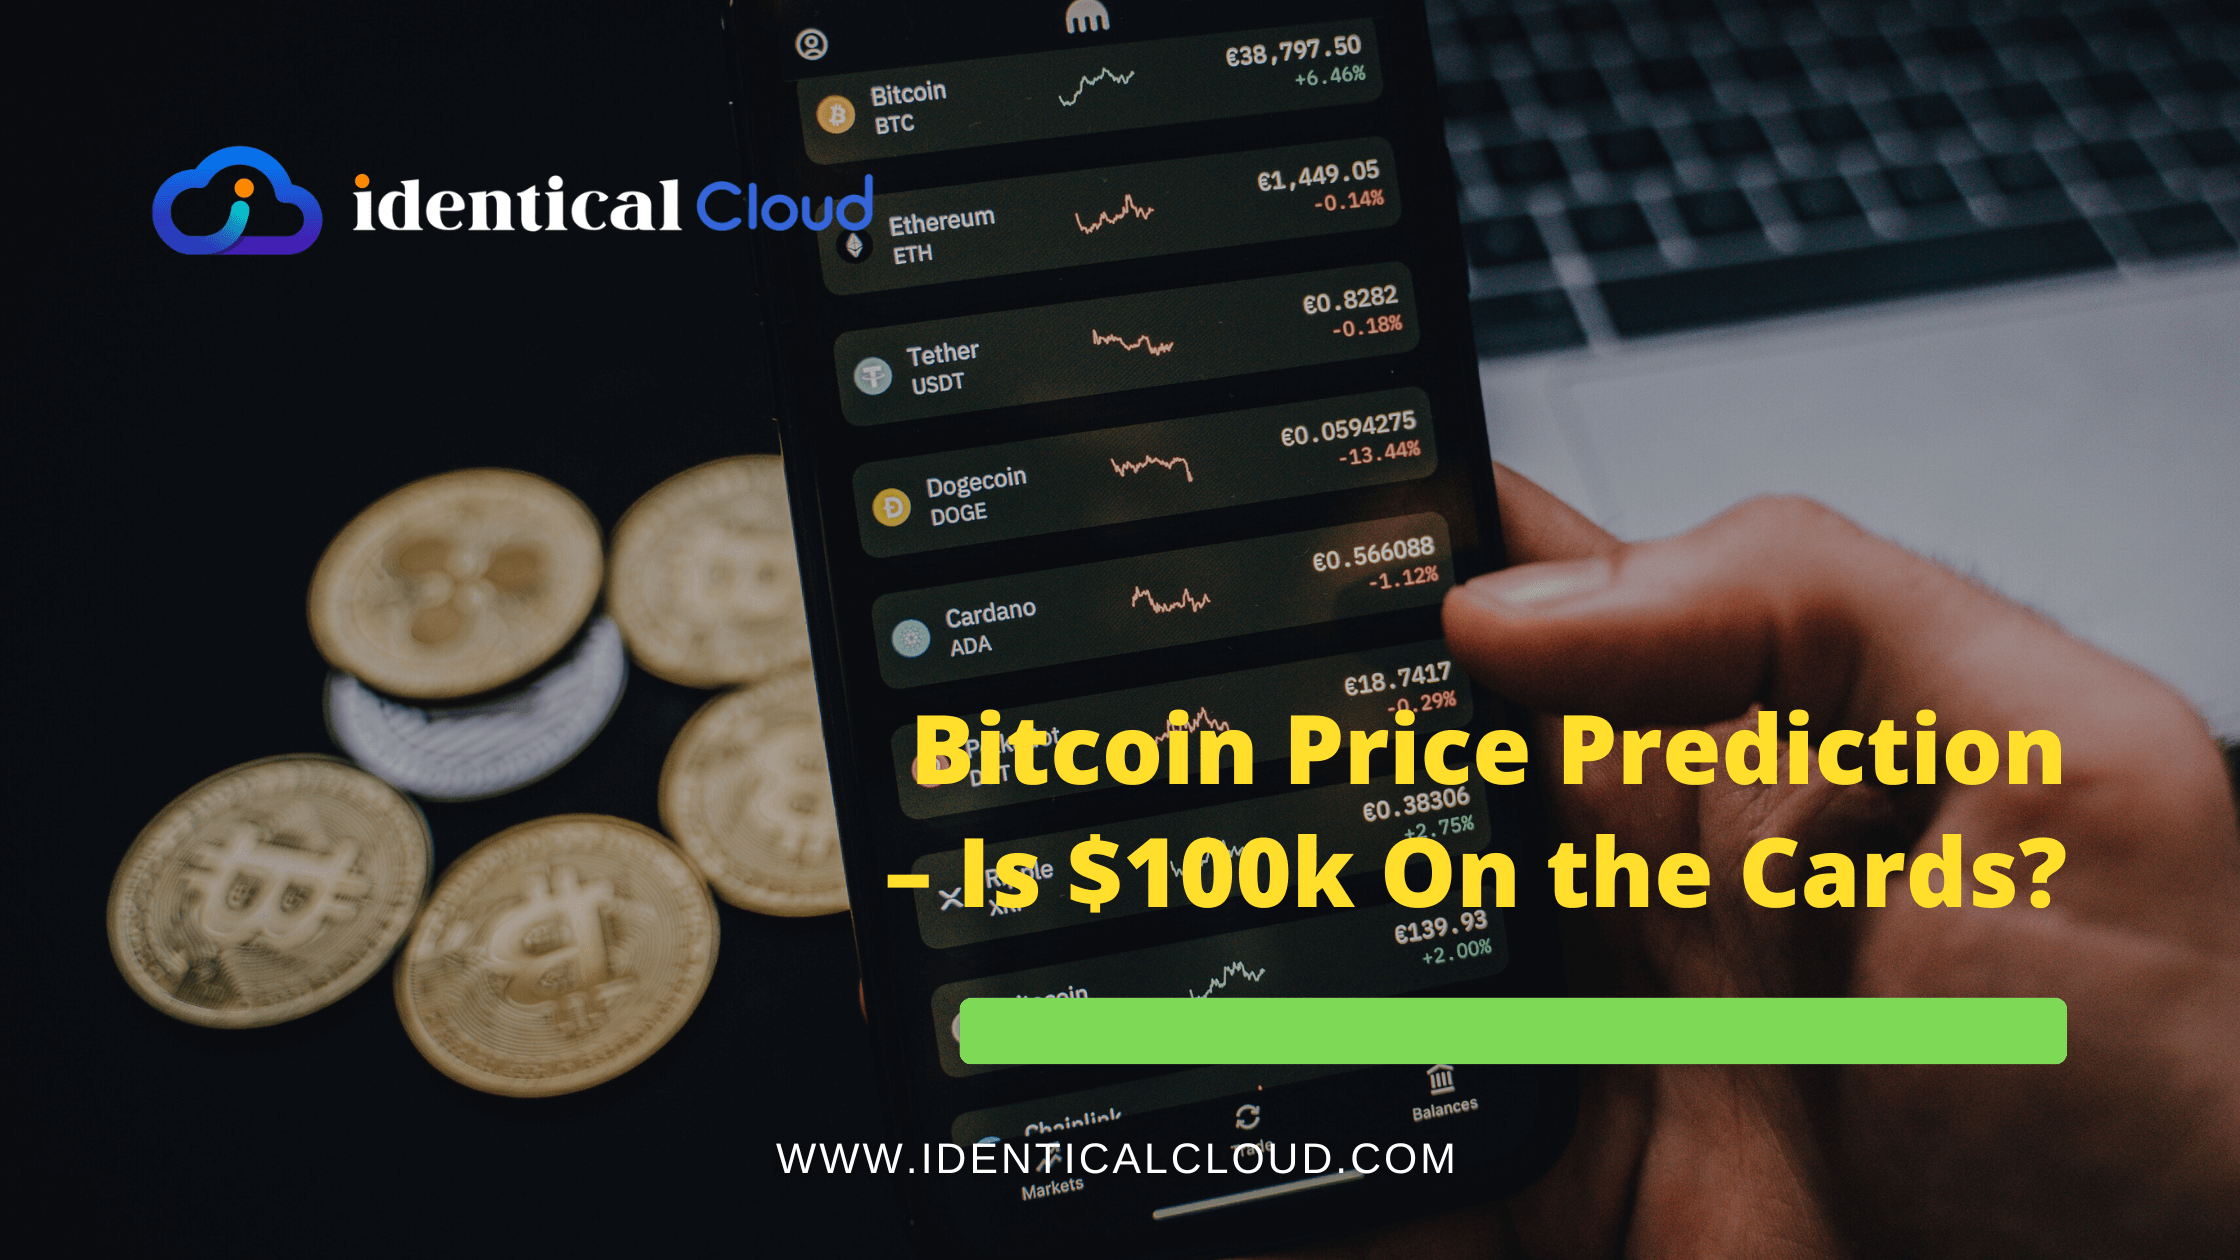 Bitcoin Price Prediction – Is $100k On the Cards? - identicalcloud.com